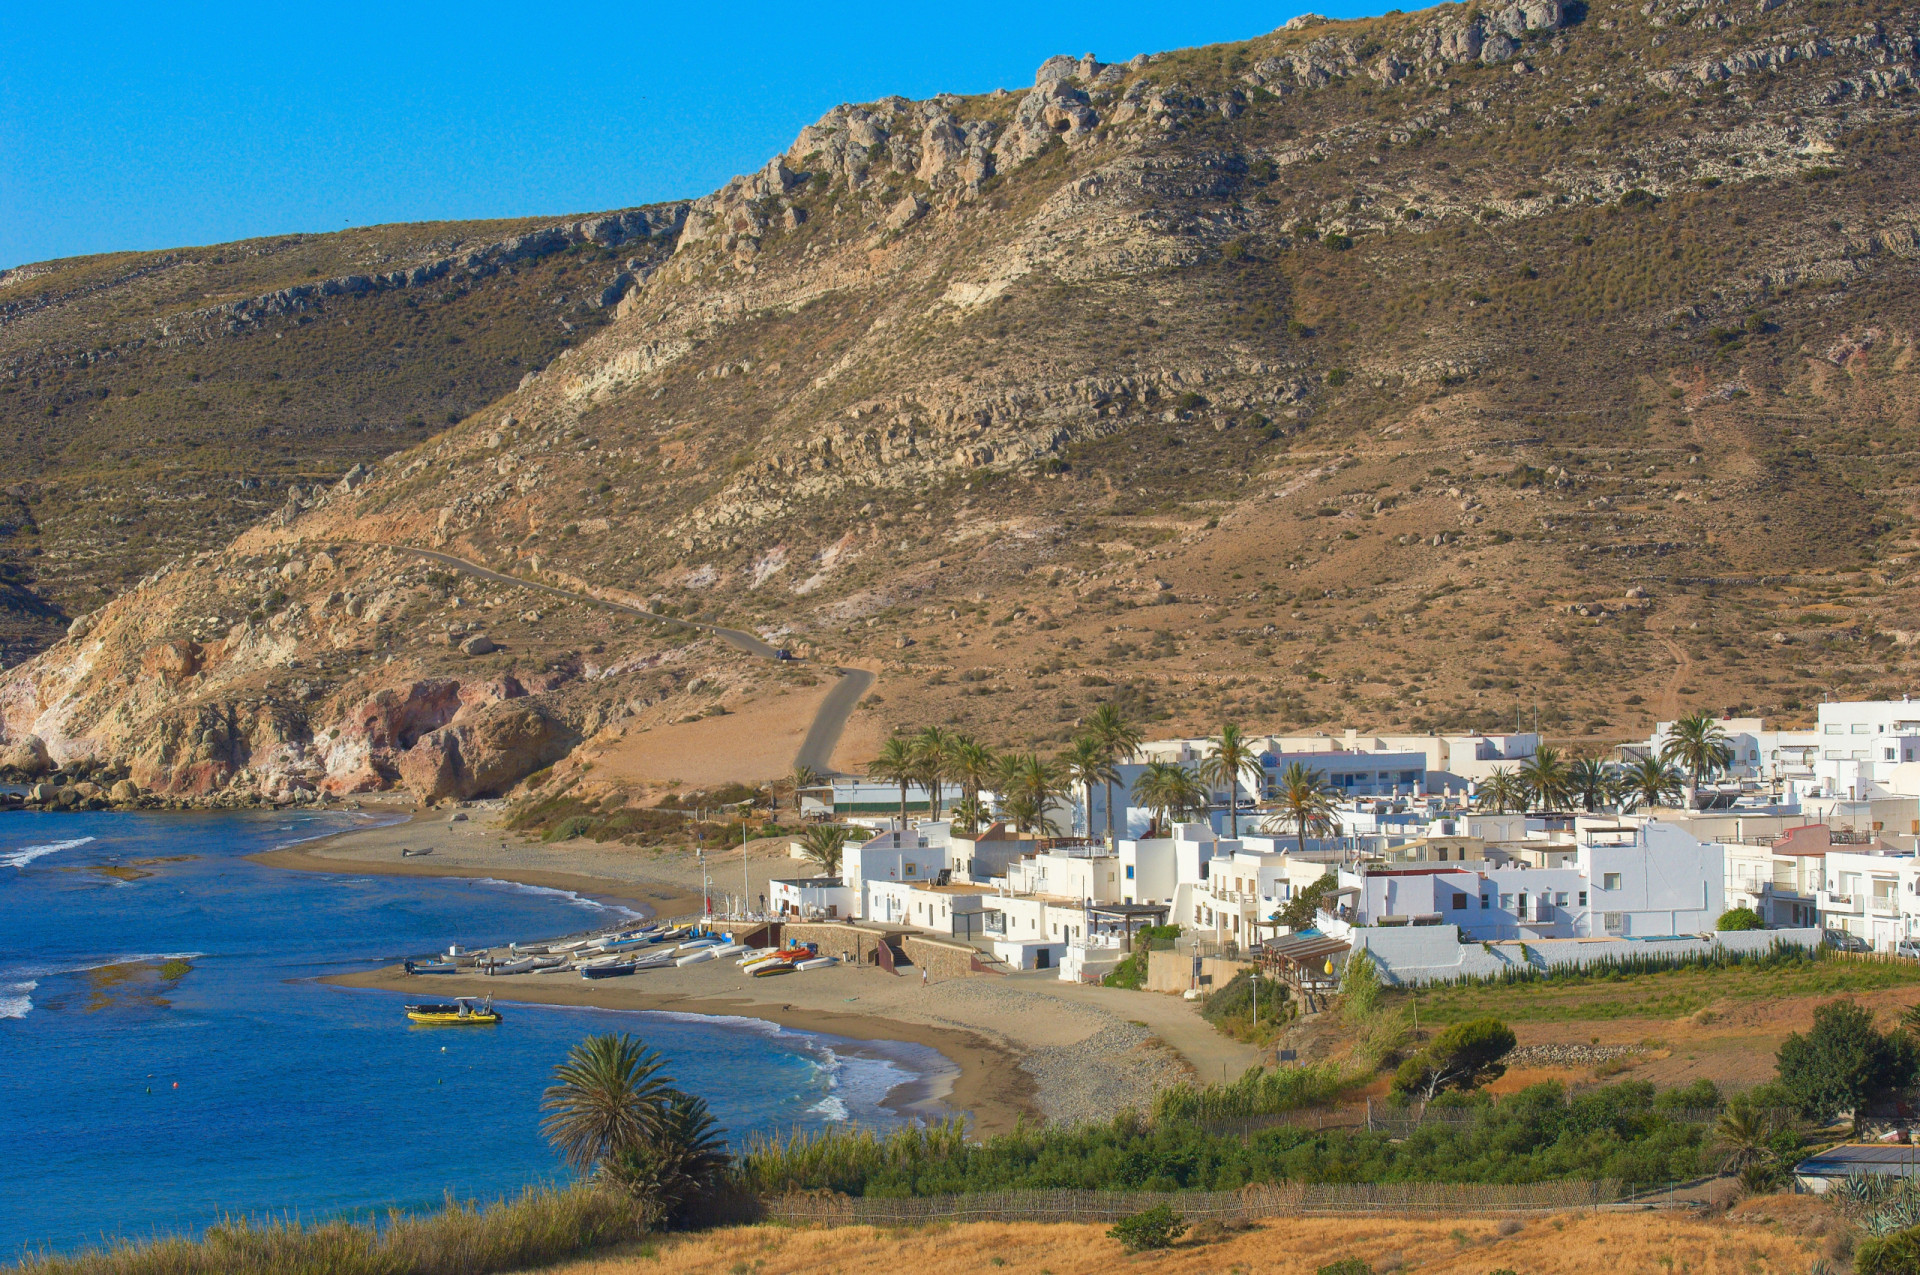 <p>The park features a coastline far removed from the Spanish Costas glamorized in travel brochures. Instead, villages like Las Negras (pictured) dot the shoreline.</p>